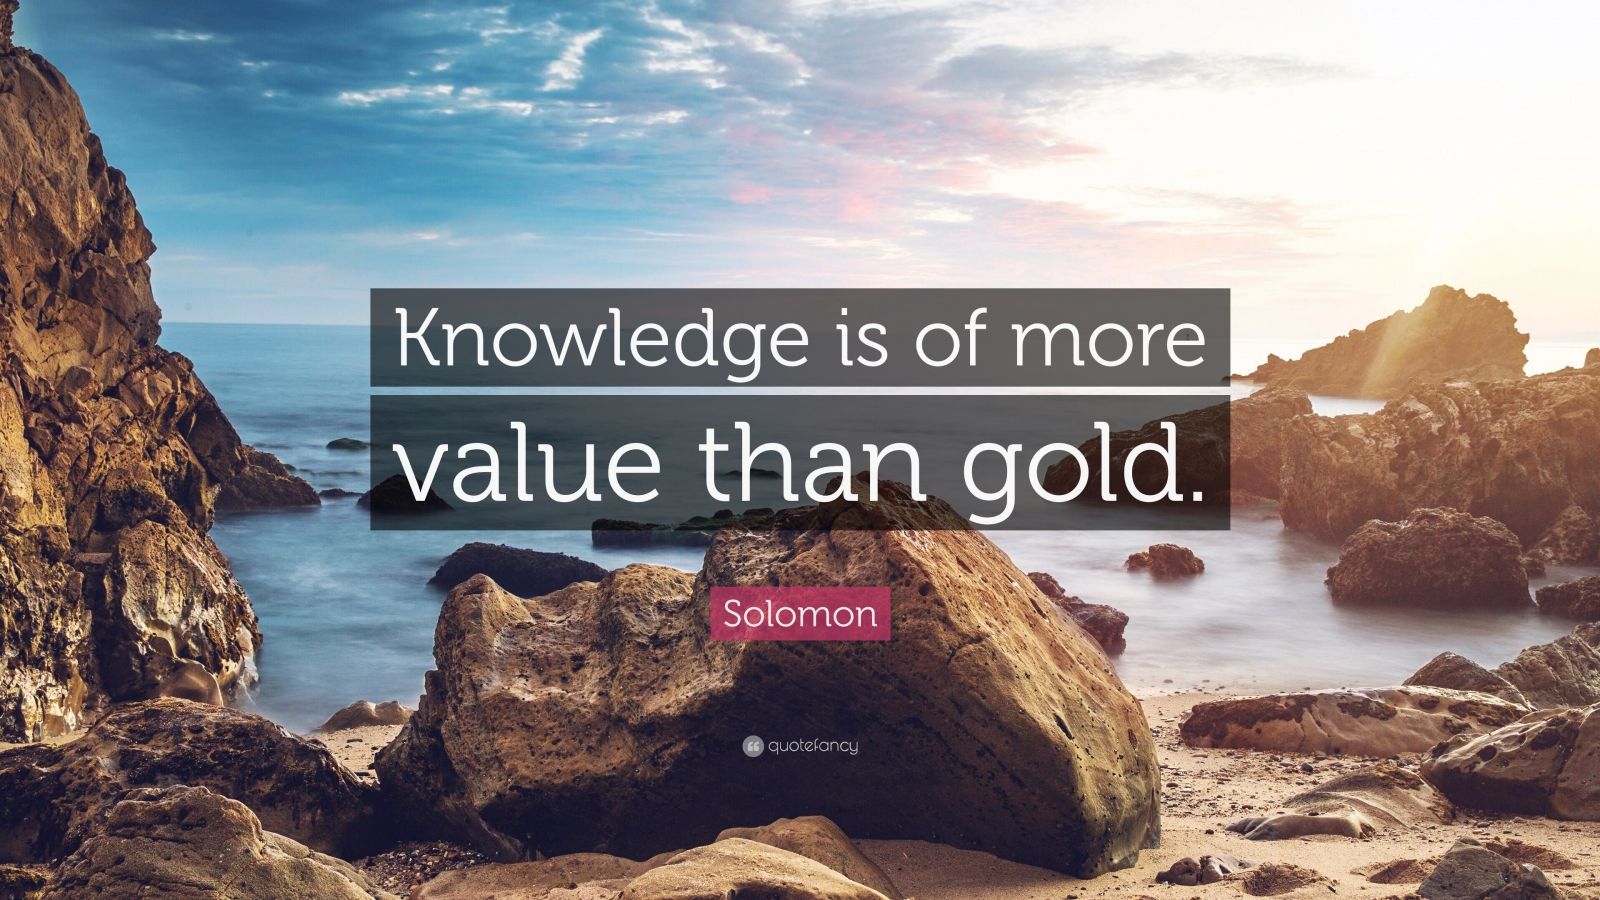 Solomon's Tutor: Why Wisdom is More Valuable than Gold - Johnny D